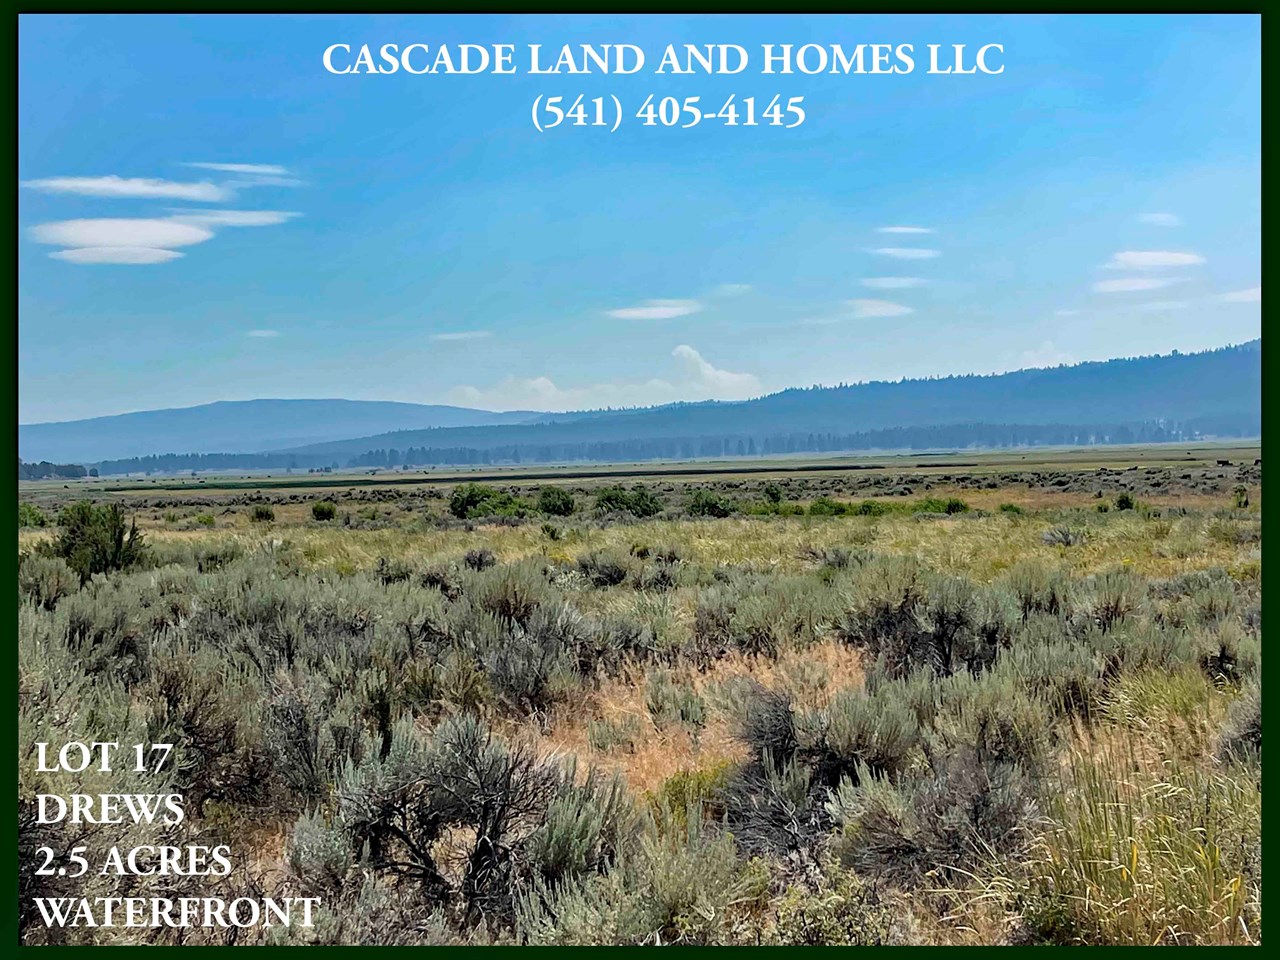 the lush sprague river valley is right out of your back door! the gentle slope of the property and the large 2.5 acre size, allow for many possible building sites!